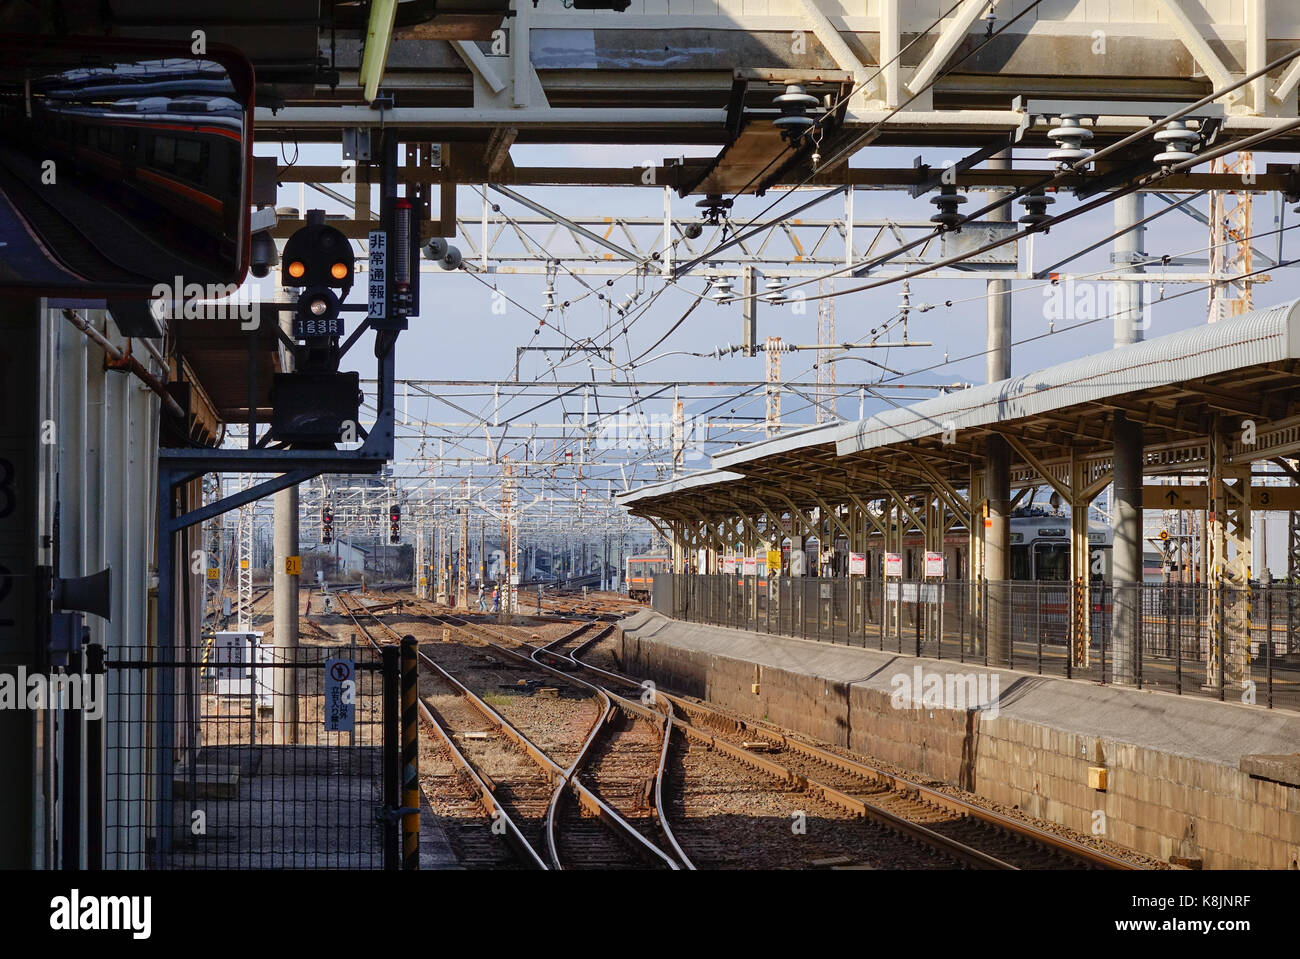 Tokyo, Japan - Dec 25, 2015. Platform with tracks at Hachioji railway station in Tokyo, Japan. Railways are the most important means of passenger tran Stock Photo